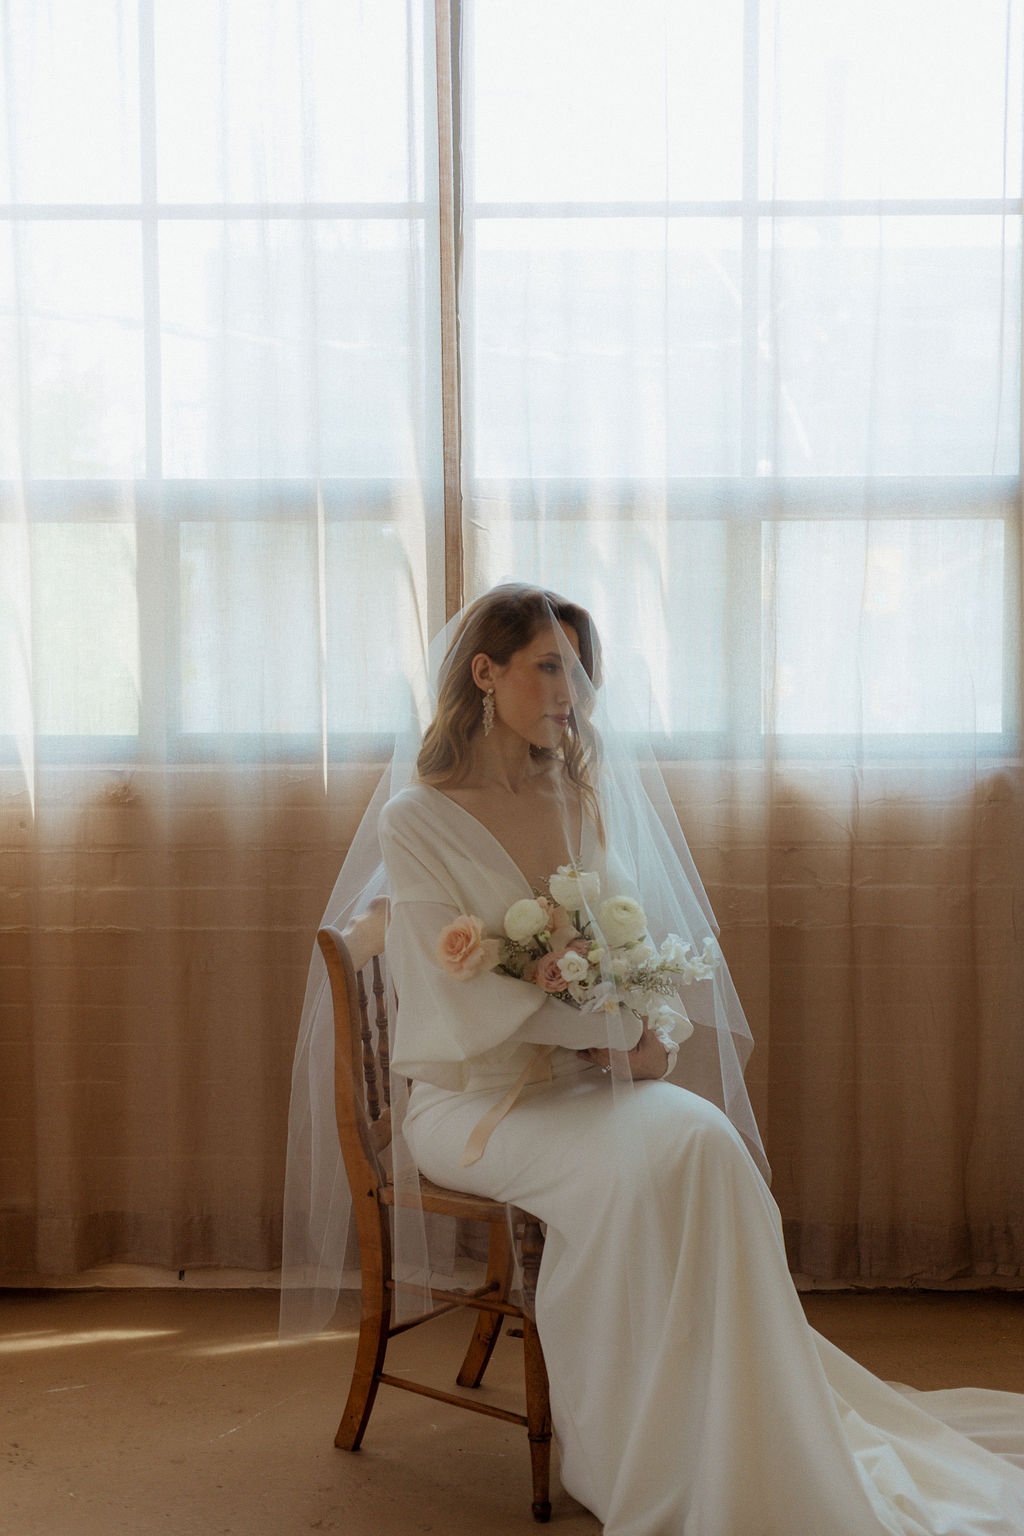 bride sitting in chair while holding flowers with viel